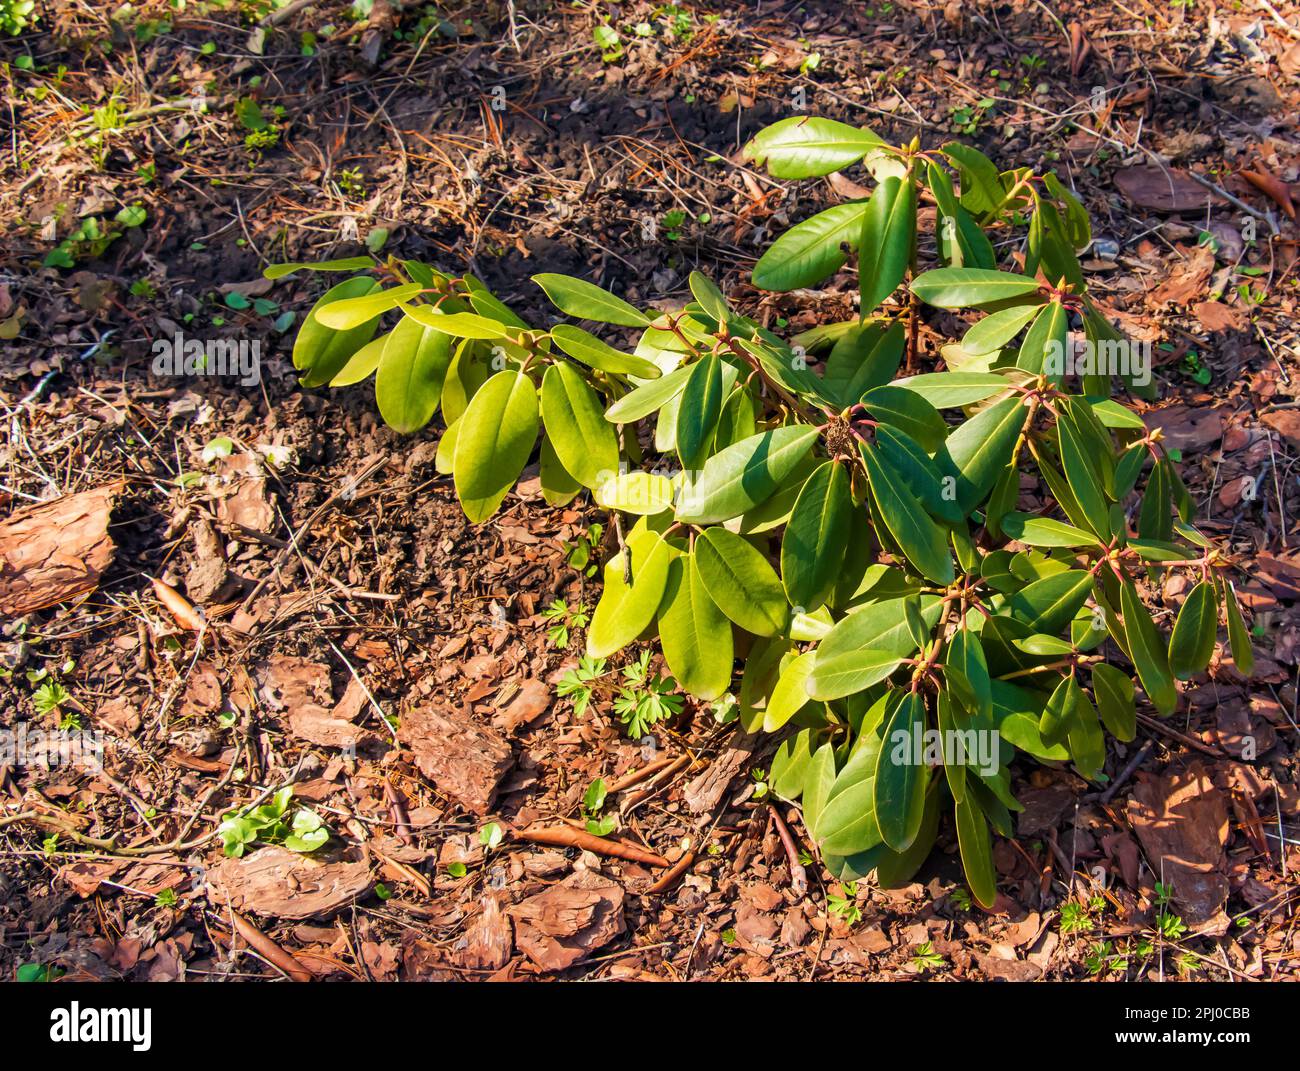 Young seedling of rhododendron in the ground in the garden in spring. The Latin name for the plant is Rhododendron L. Stock Photo